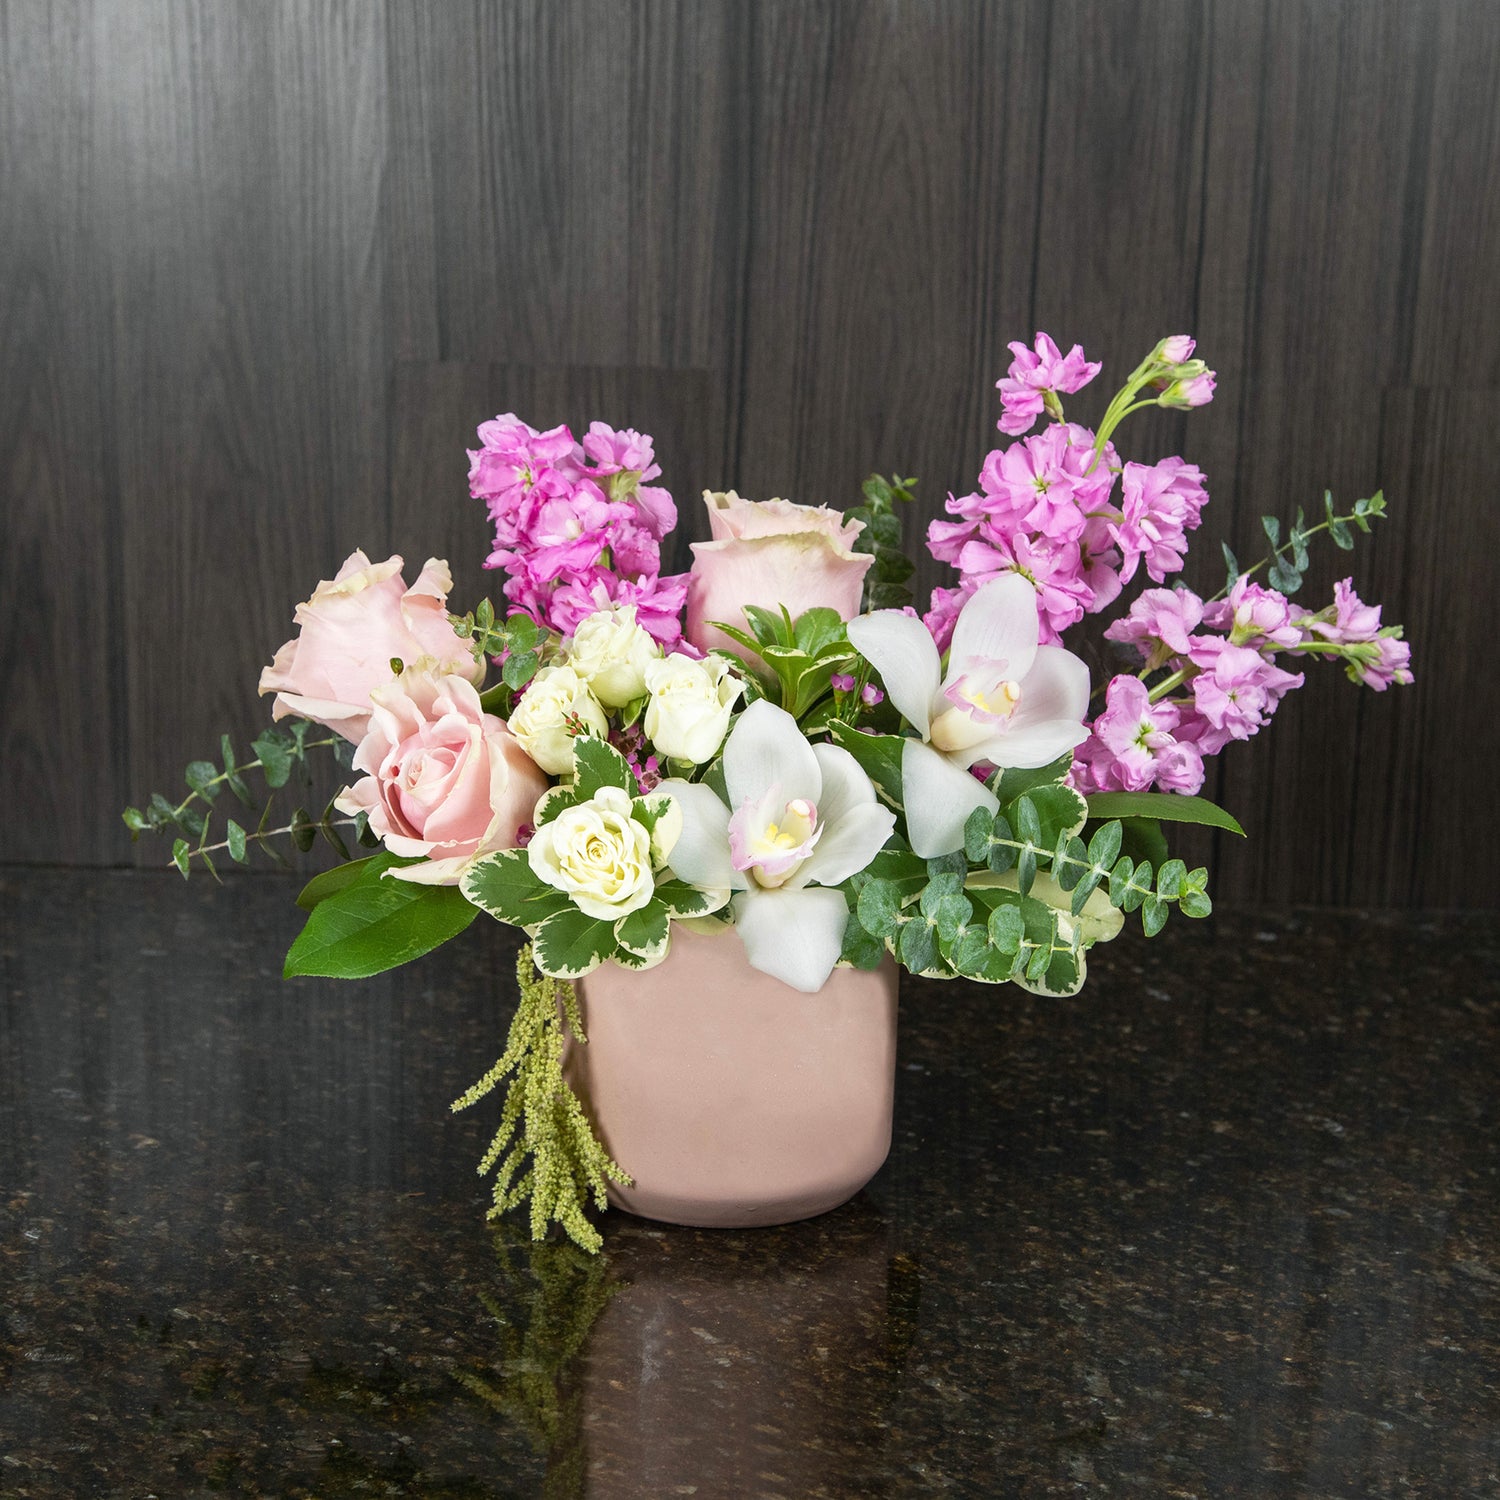 a flower arrangement with a mix of pink and white flowers in a pink ceramic vase